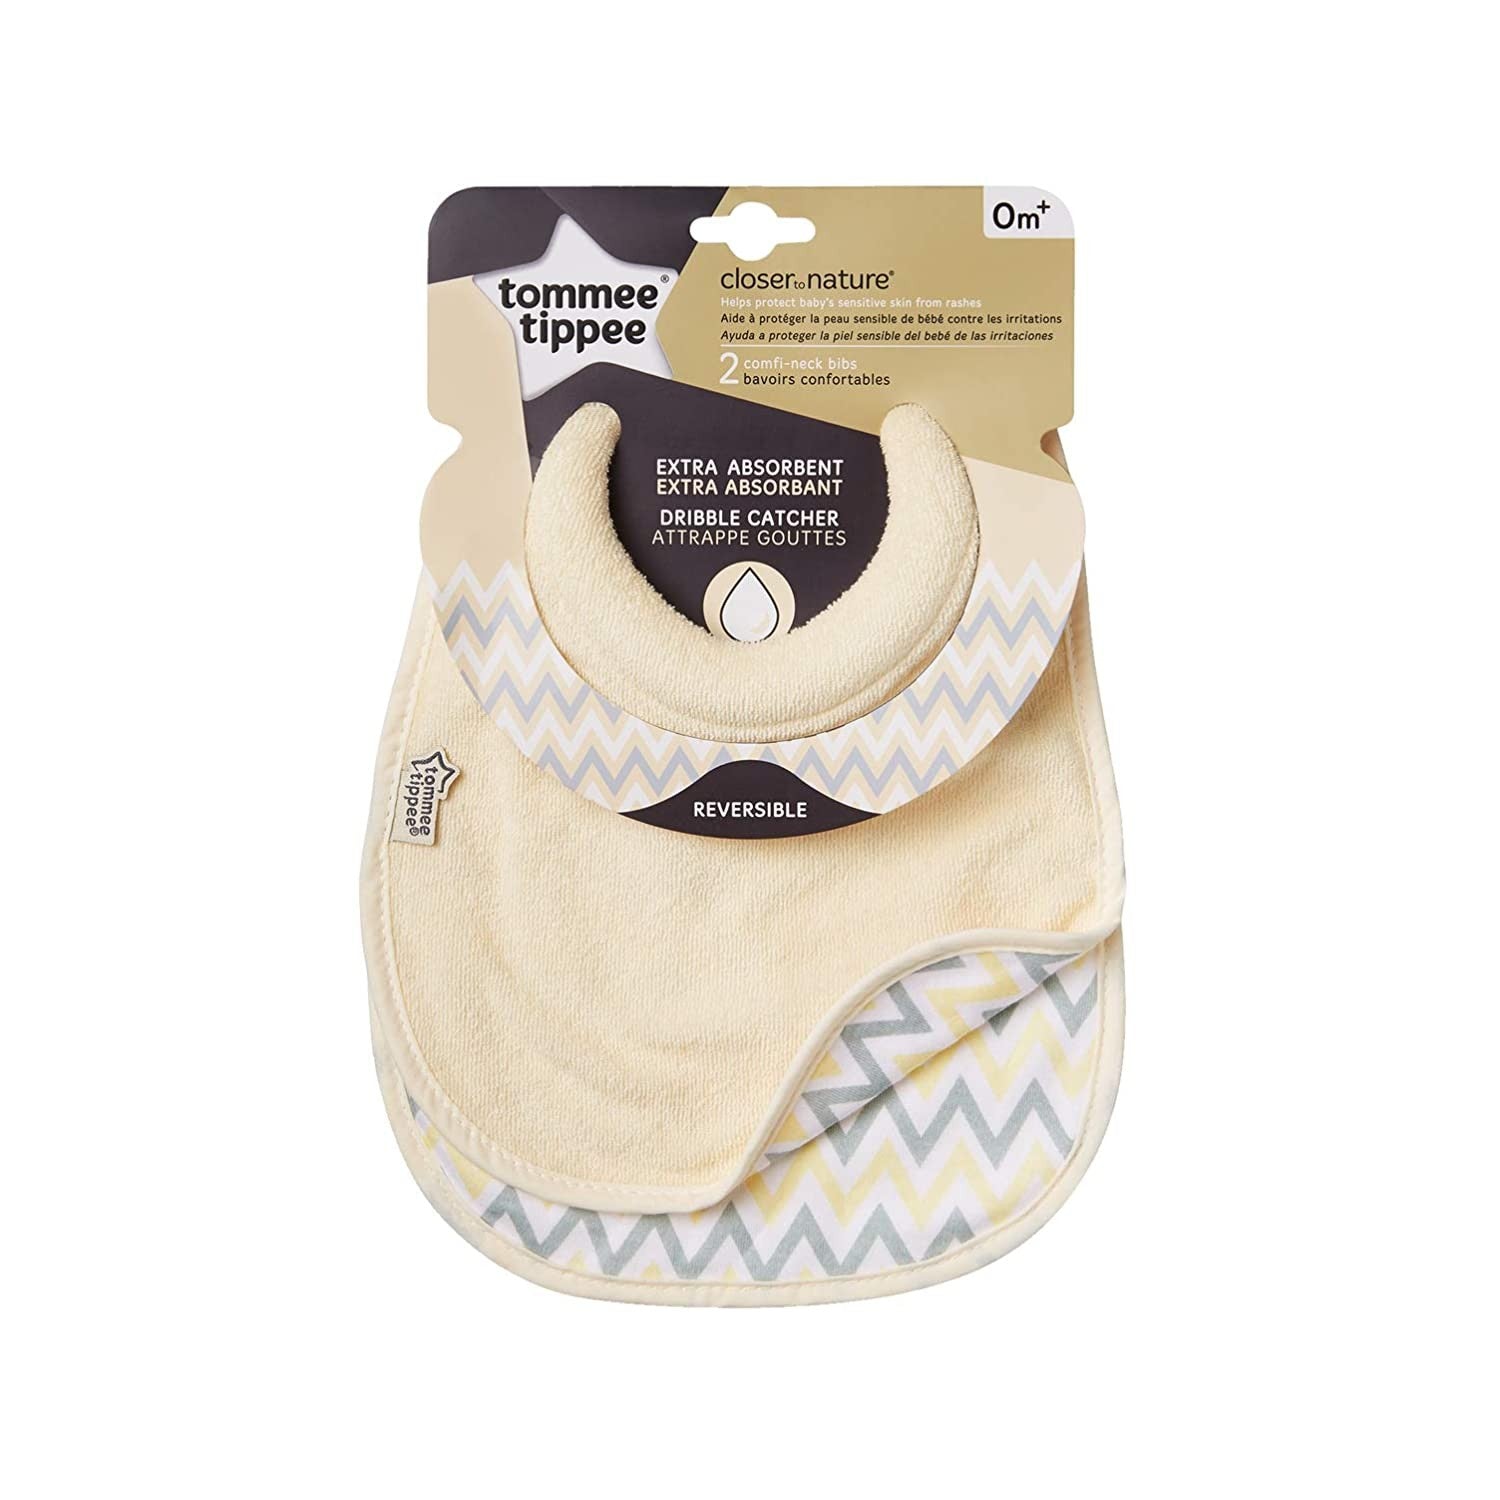 BABERO CONFORTABLE x2 CREMA TOMMEE TIPPEE